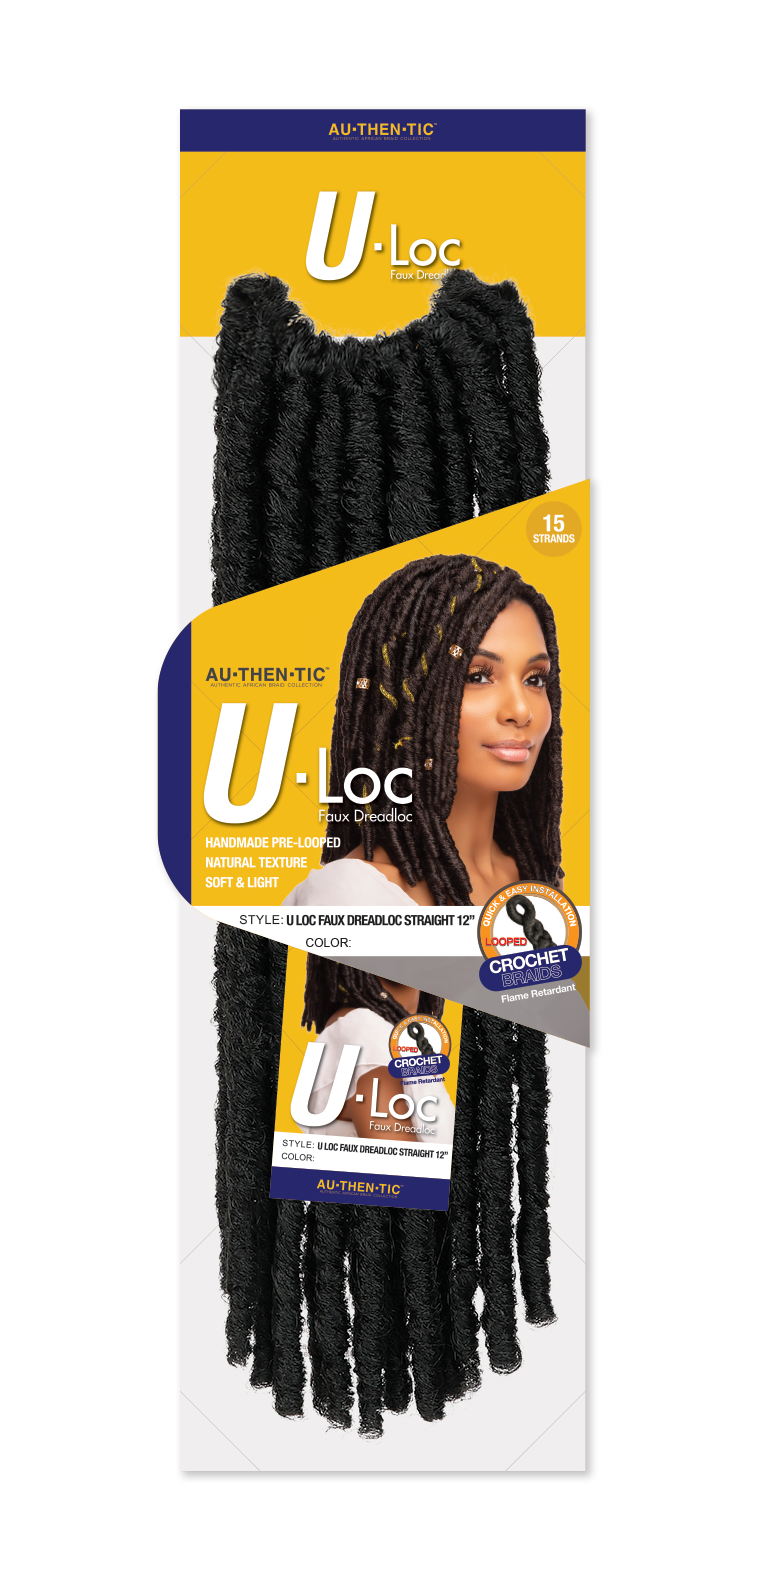 Look at these dreadlock products 🤯 #dreads #dreadlocks #locs #viral #